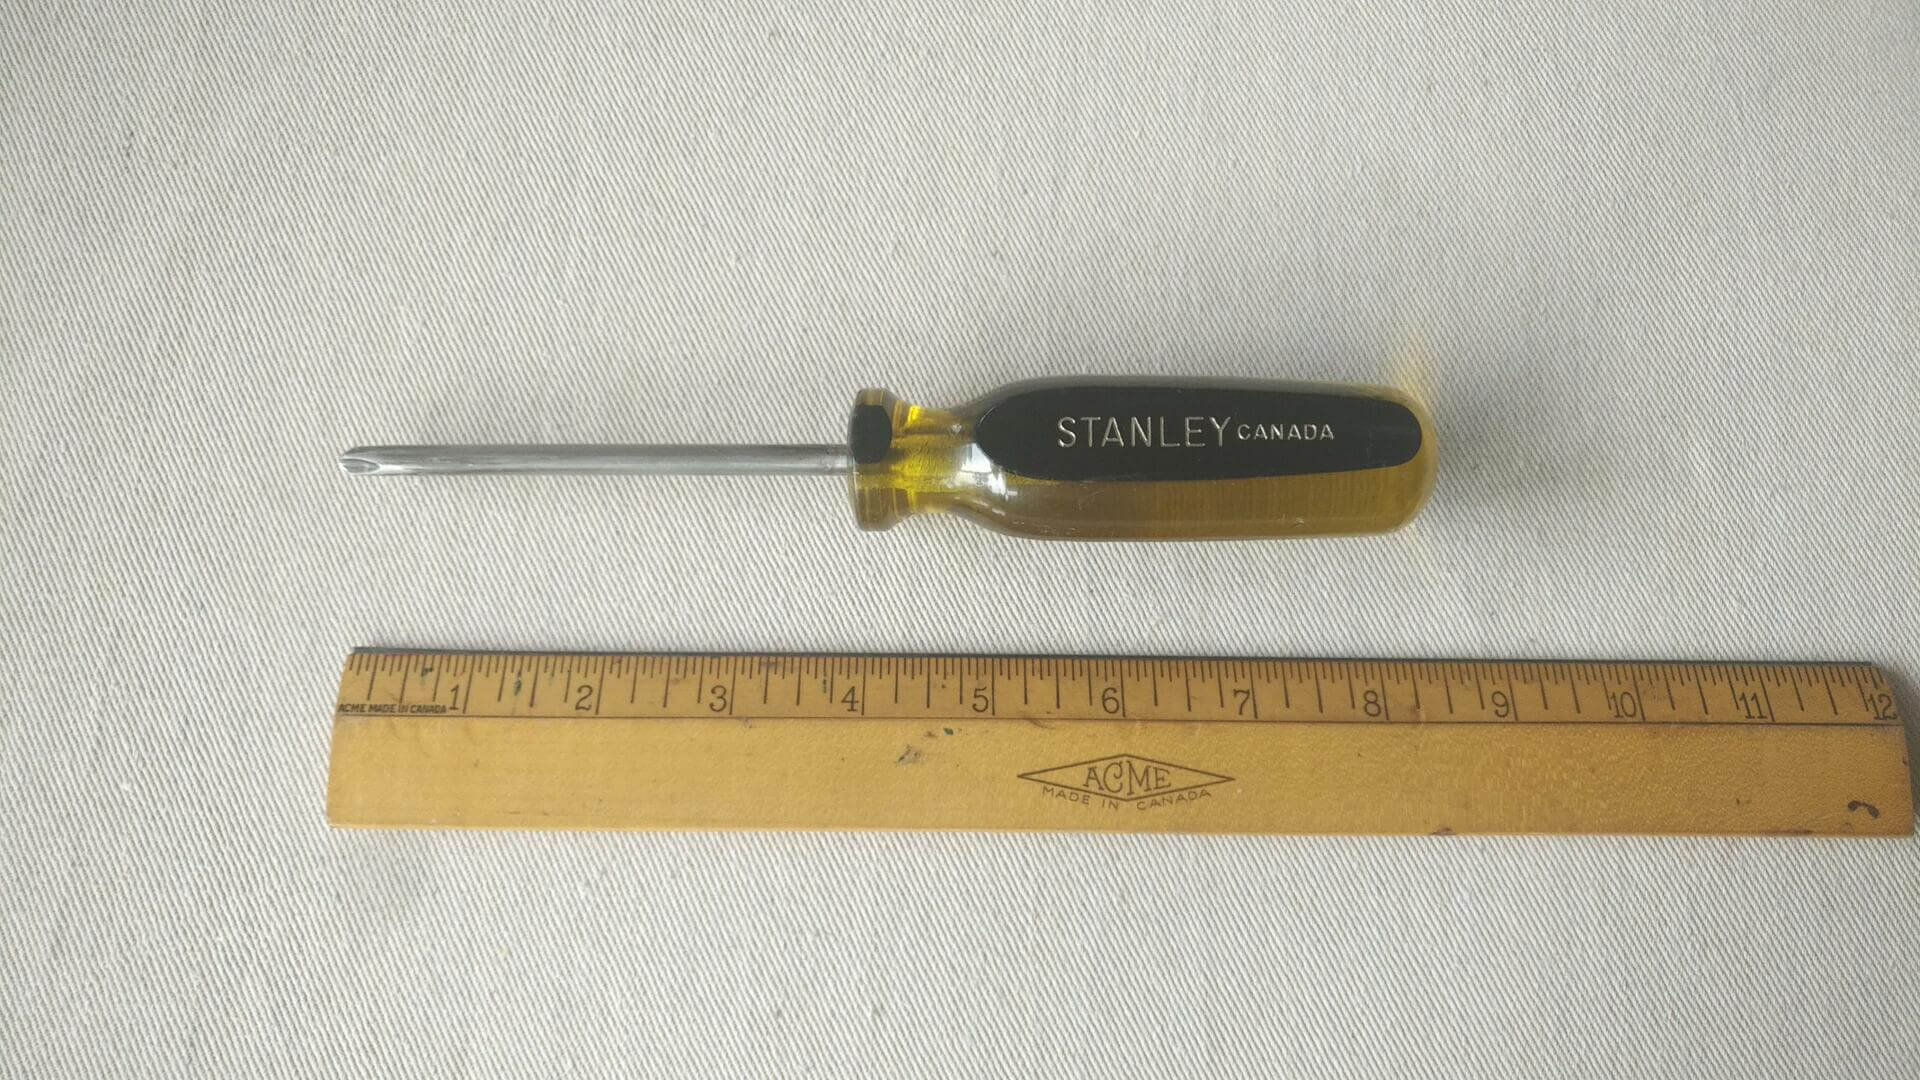 Beautiful Stanley Workmaster 66-746 phillips head screwdriver with unbreakable translucent handle. Rare vintage 1970s made in Canada collectible hand tools